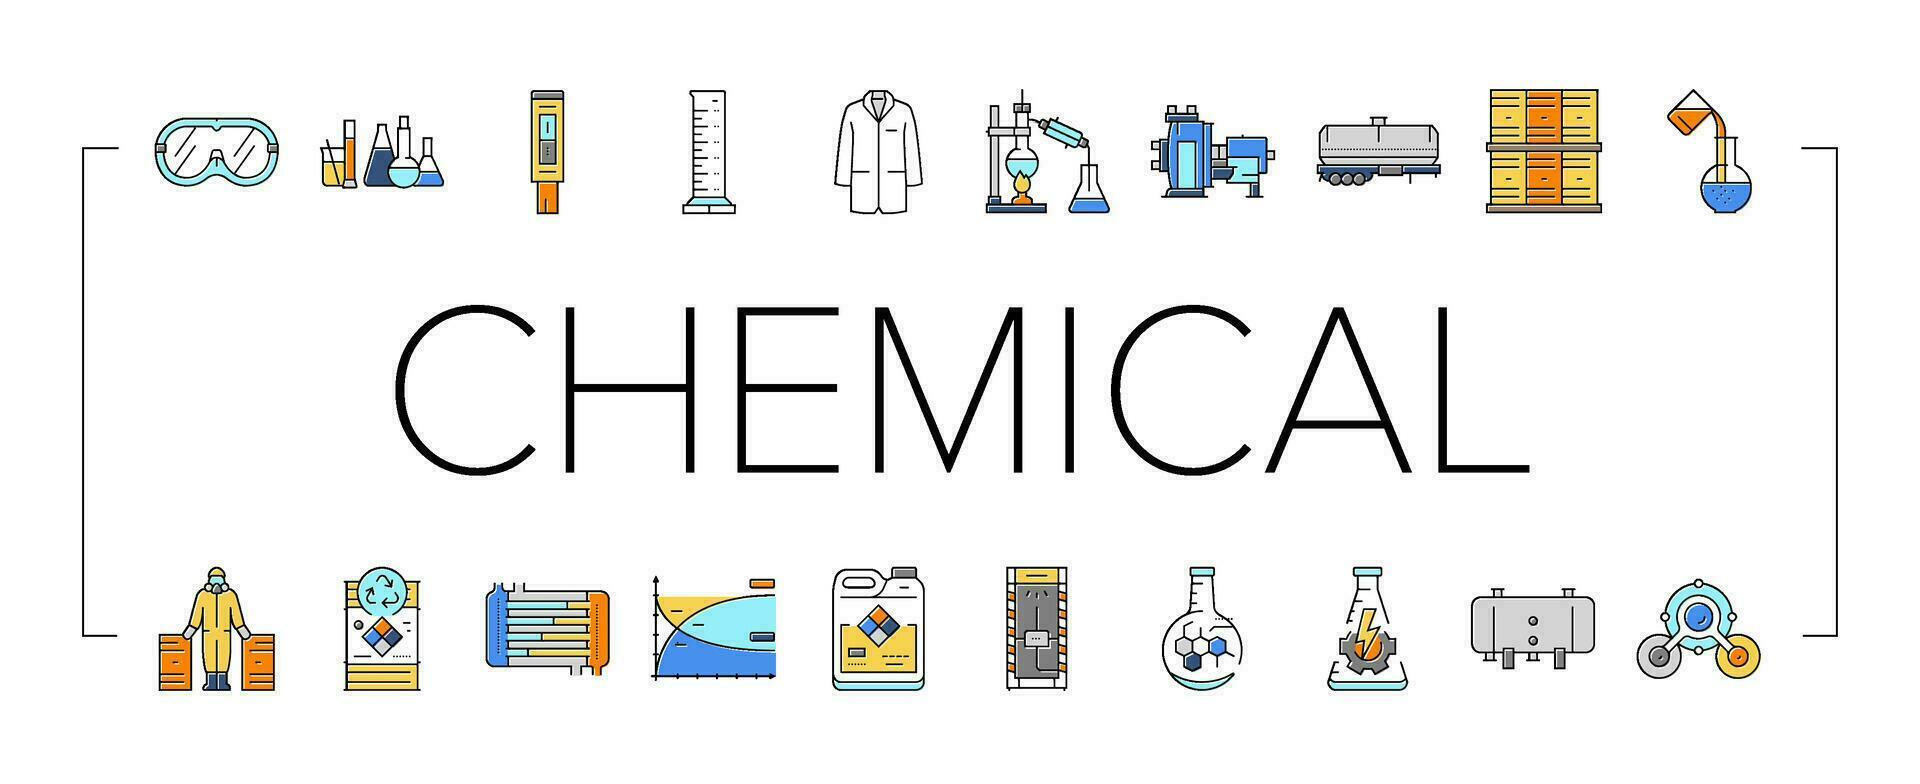 chemical engineer research icons set vector